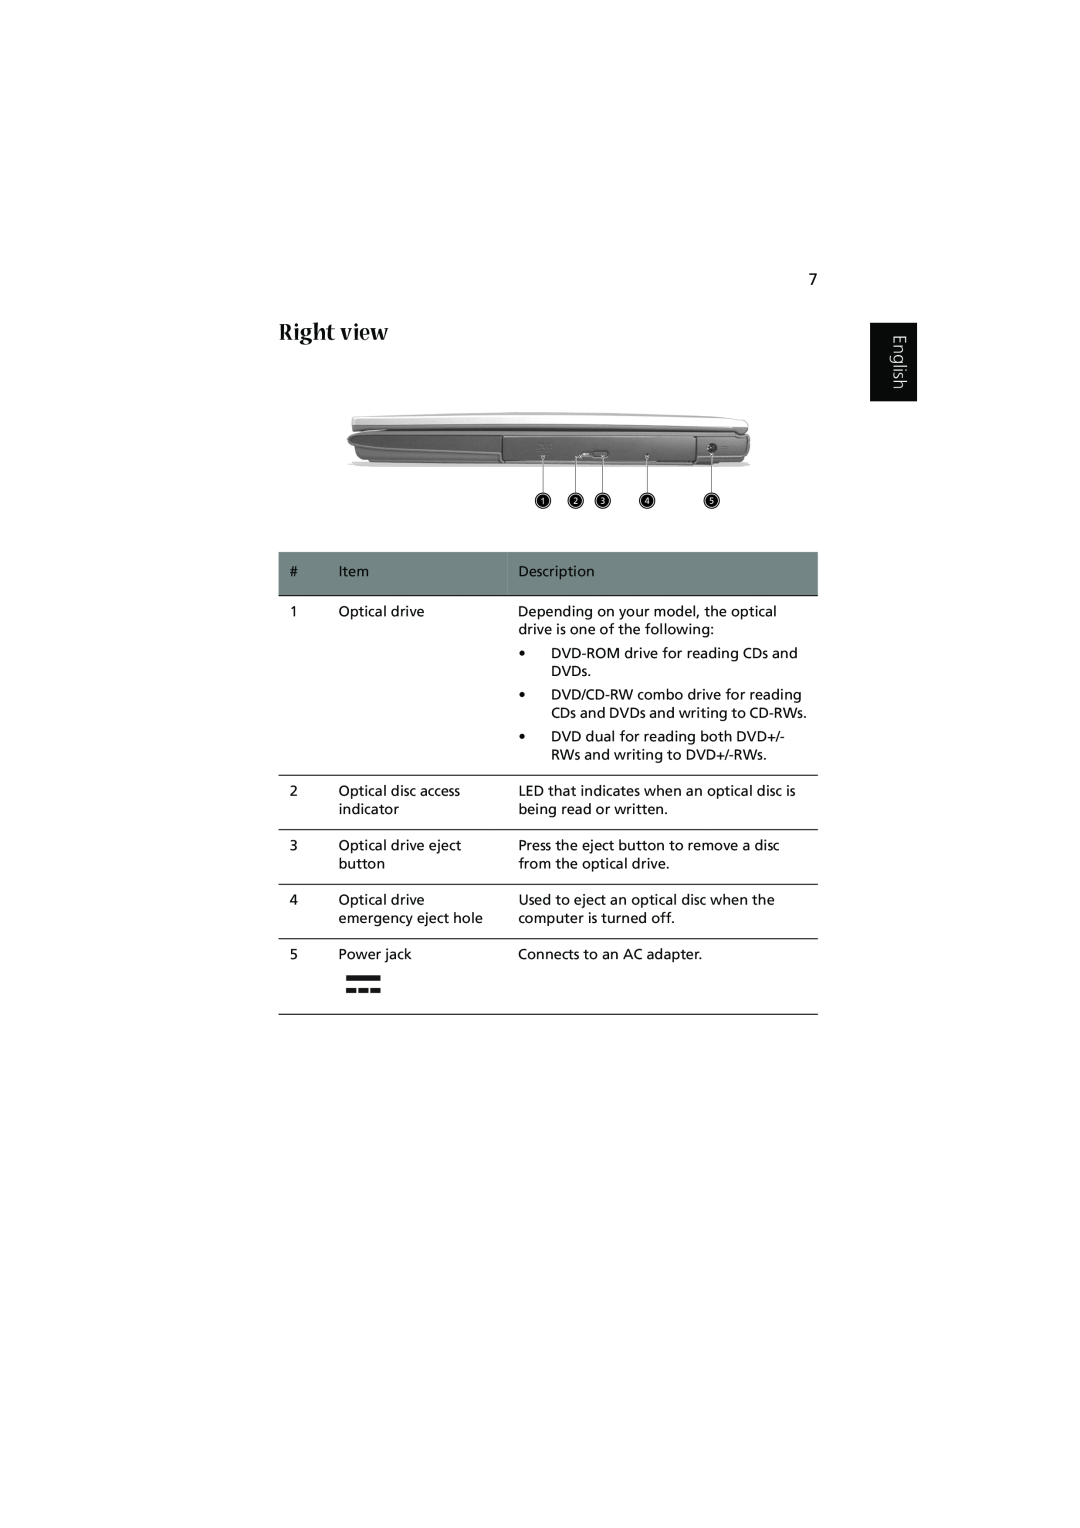 Acer 1450 manual Right view, English 